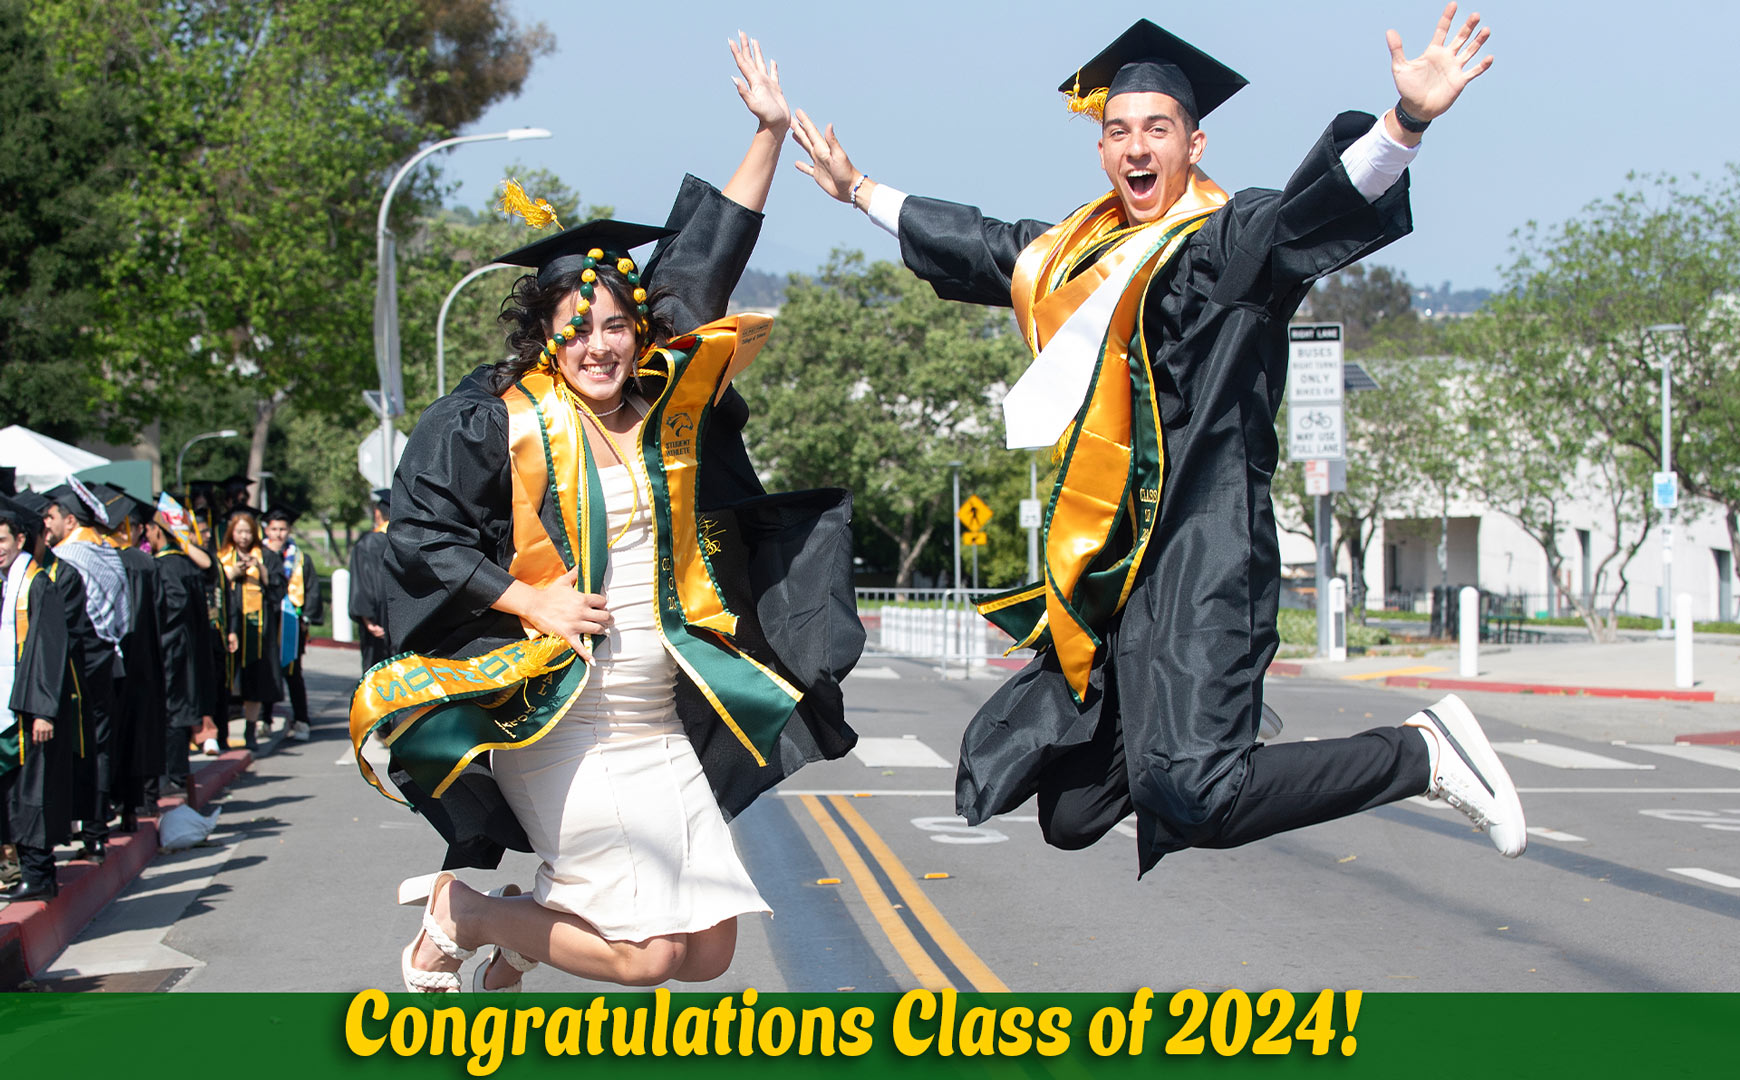 Two 2024 graduates jumping for joy